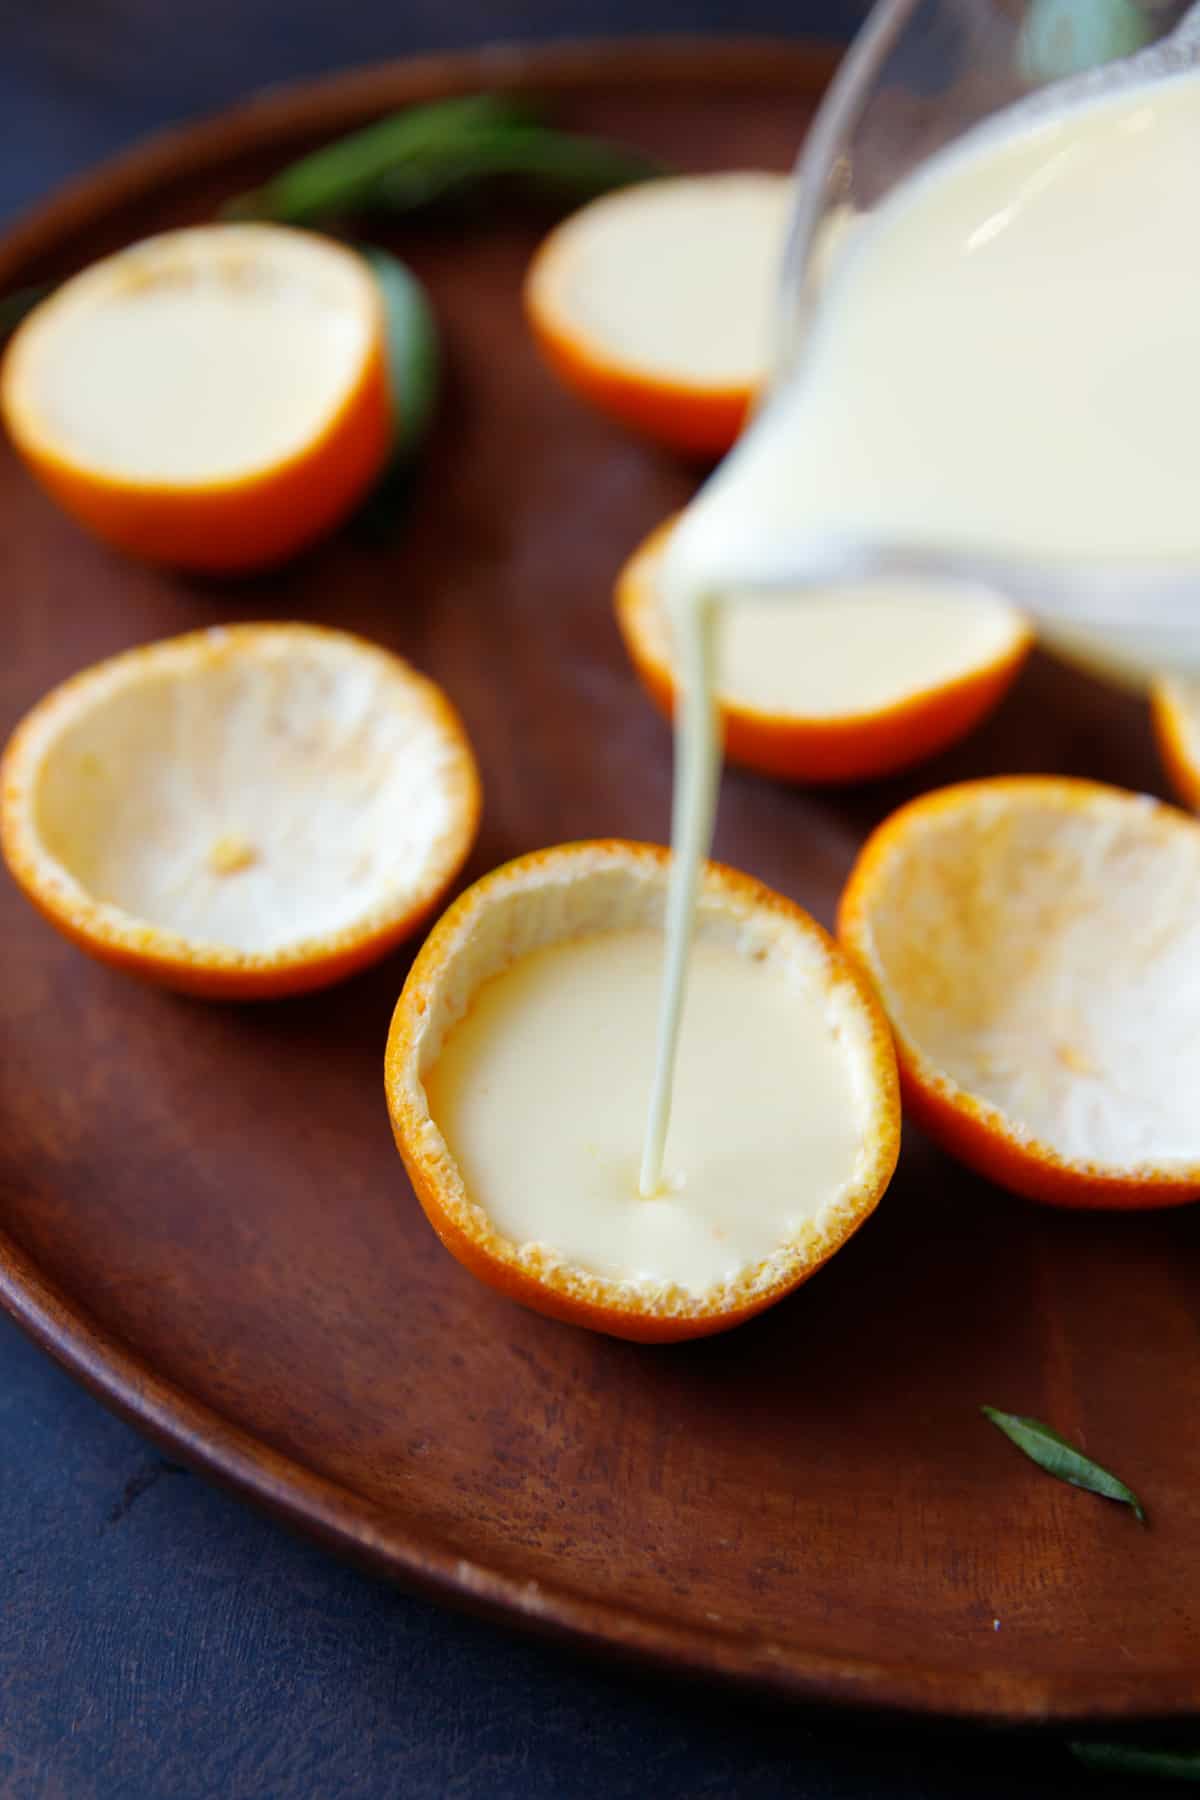 Tangerine shells on acacia plate filled with creamy posset mixture